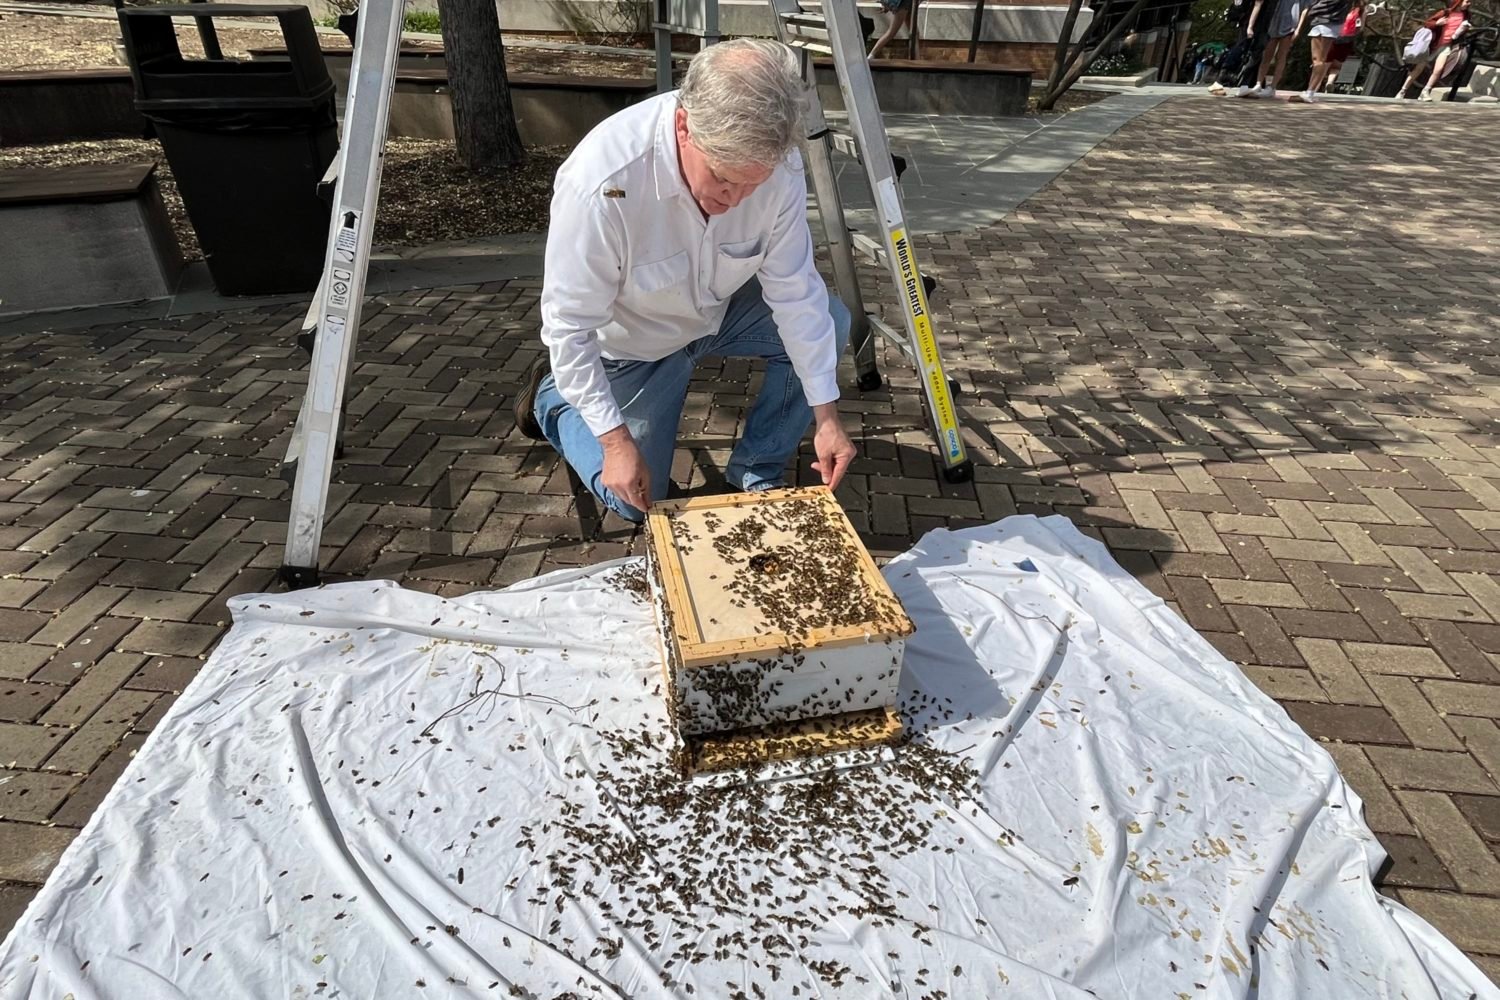 Sean Kennedy of the DC Beekeepers Alliance.